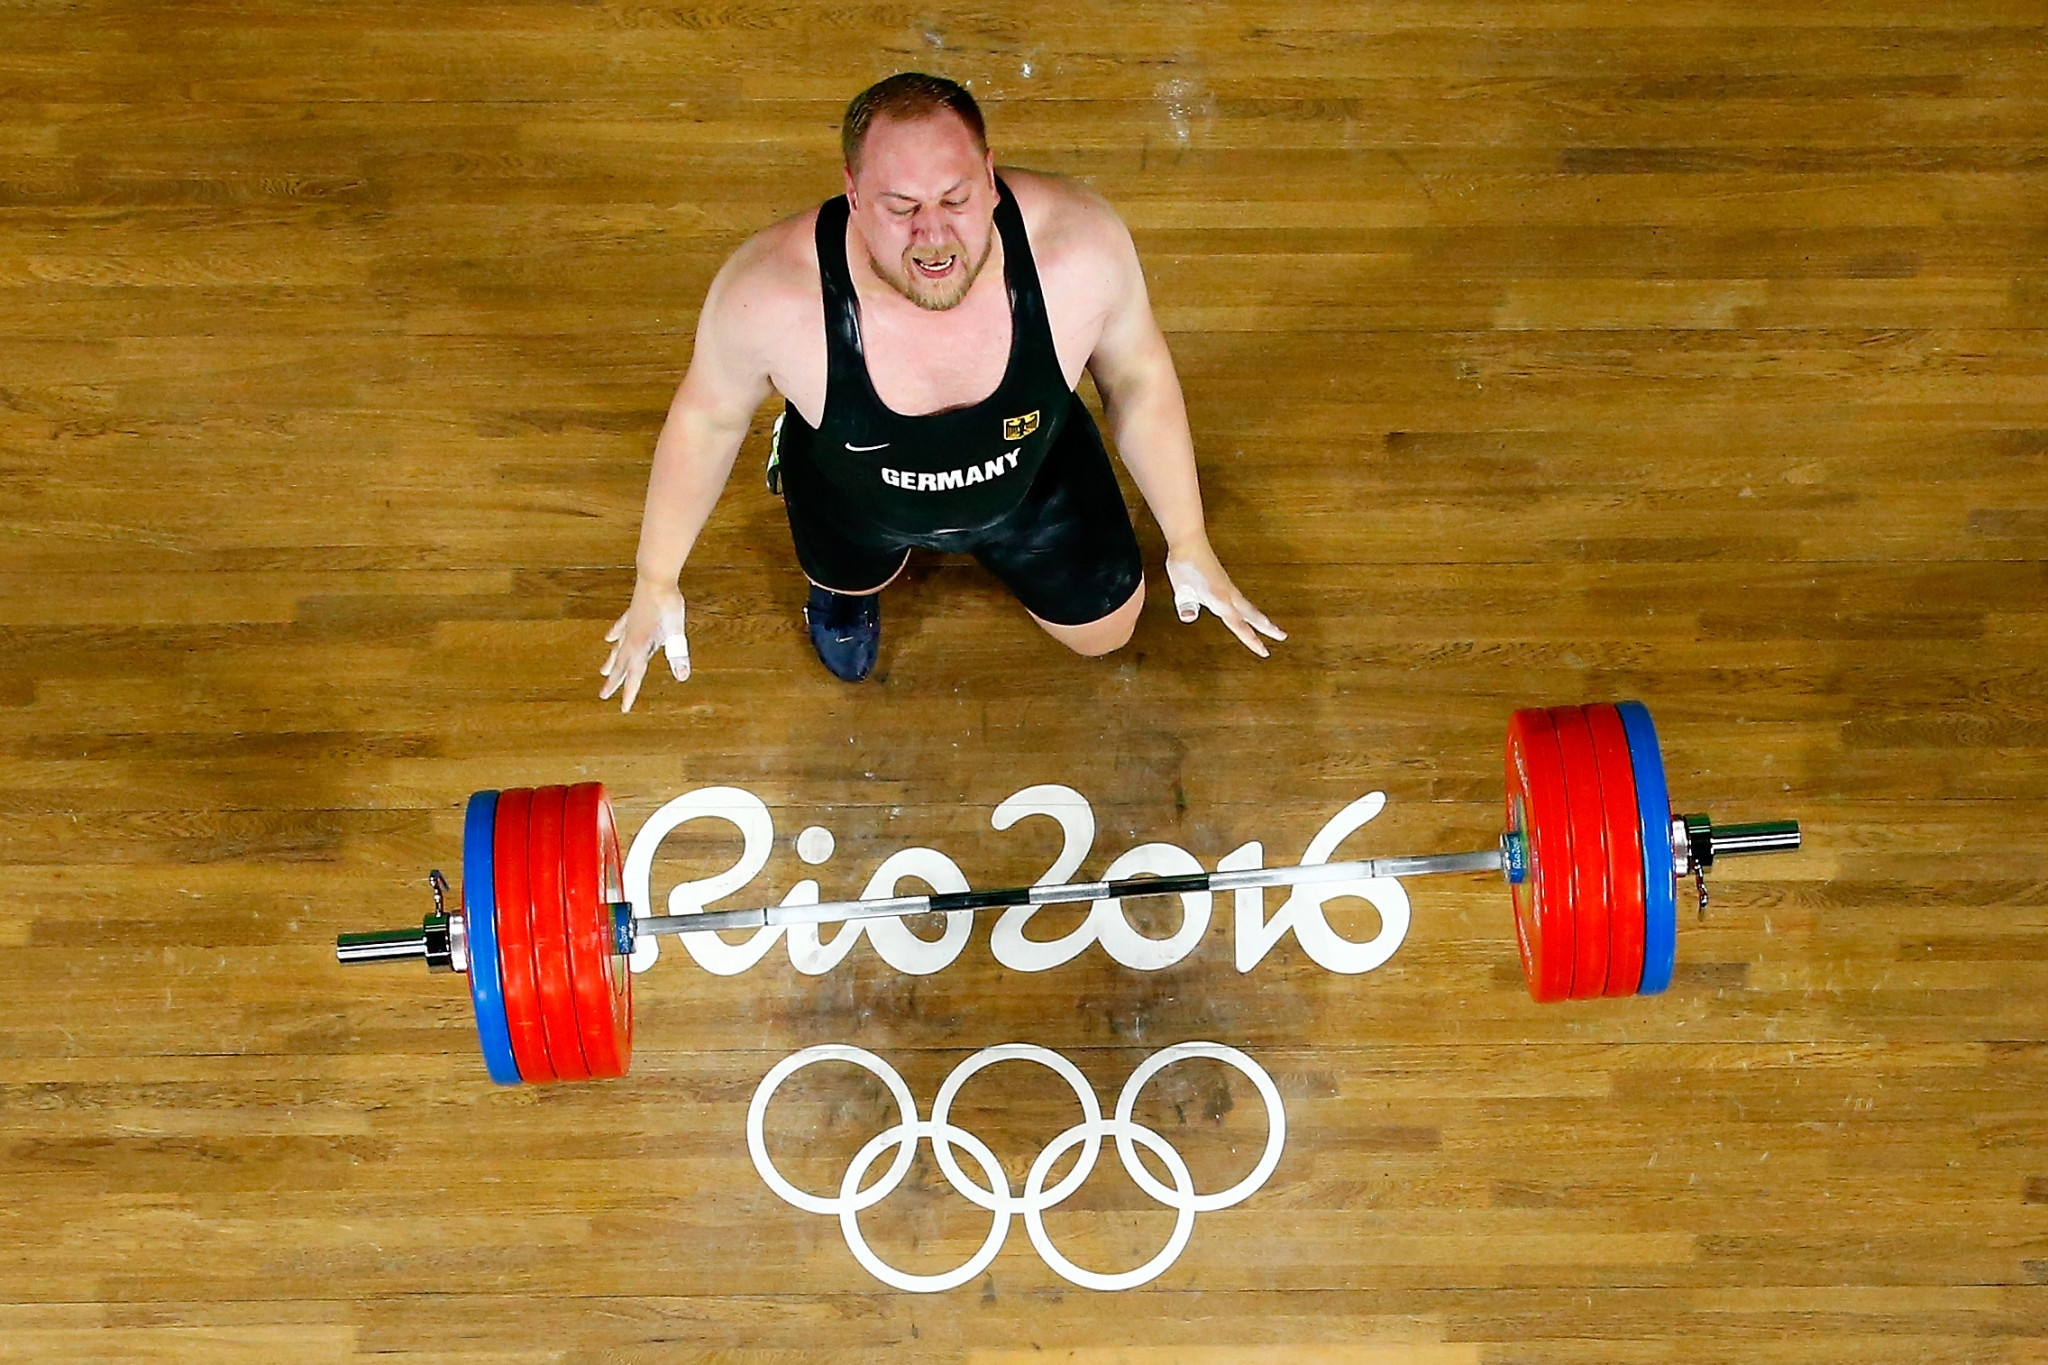 The International Weightlifting Federation had more than $8 million in the bank during the Rio 2016 Olympics ©Getty Images